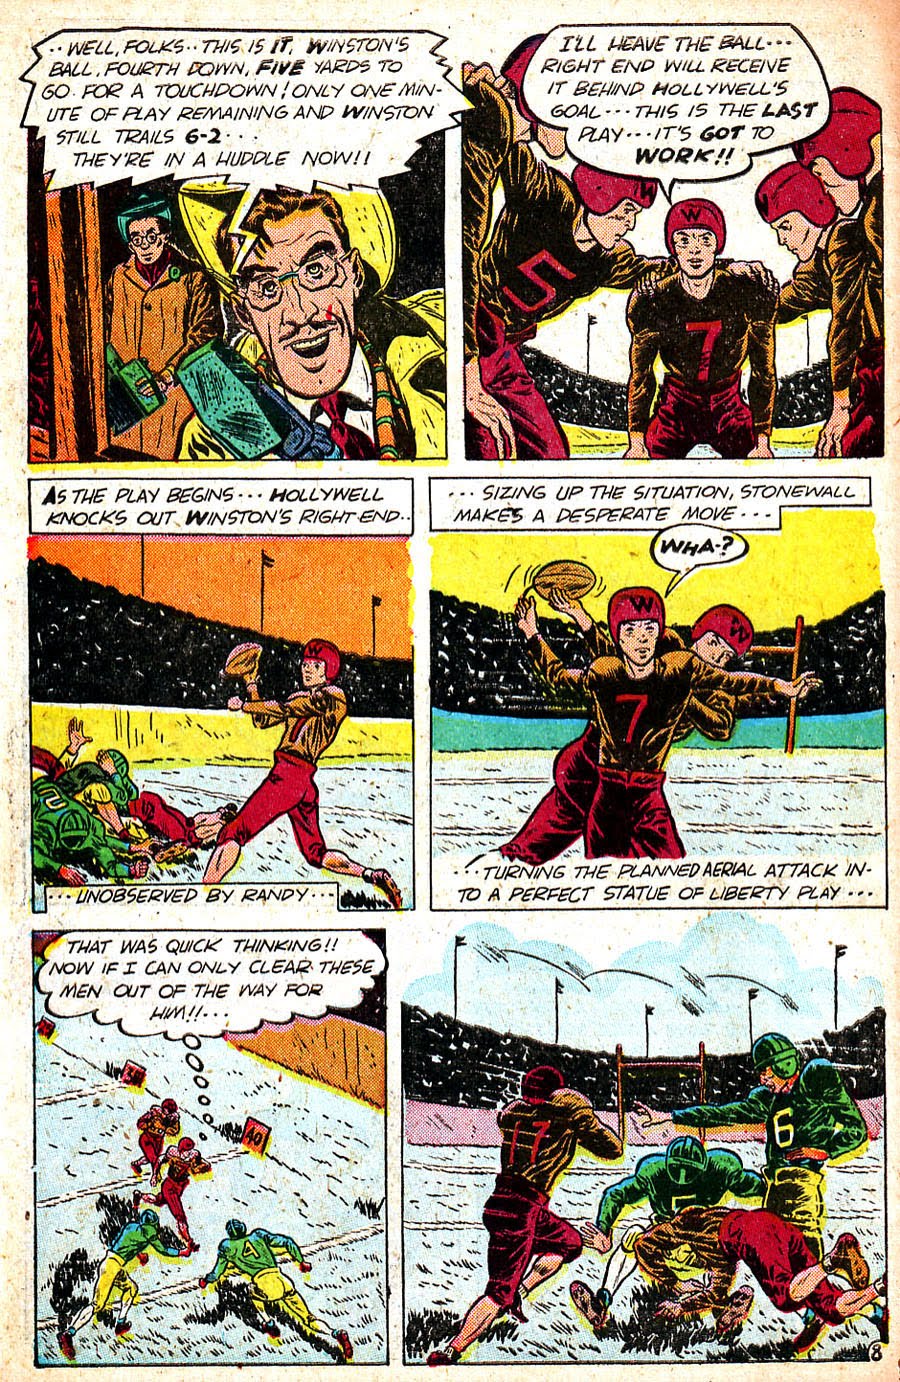 Sugar Bowl v1 #3 golden age comic book page art by Alex Toth